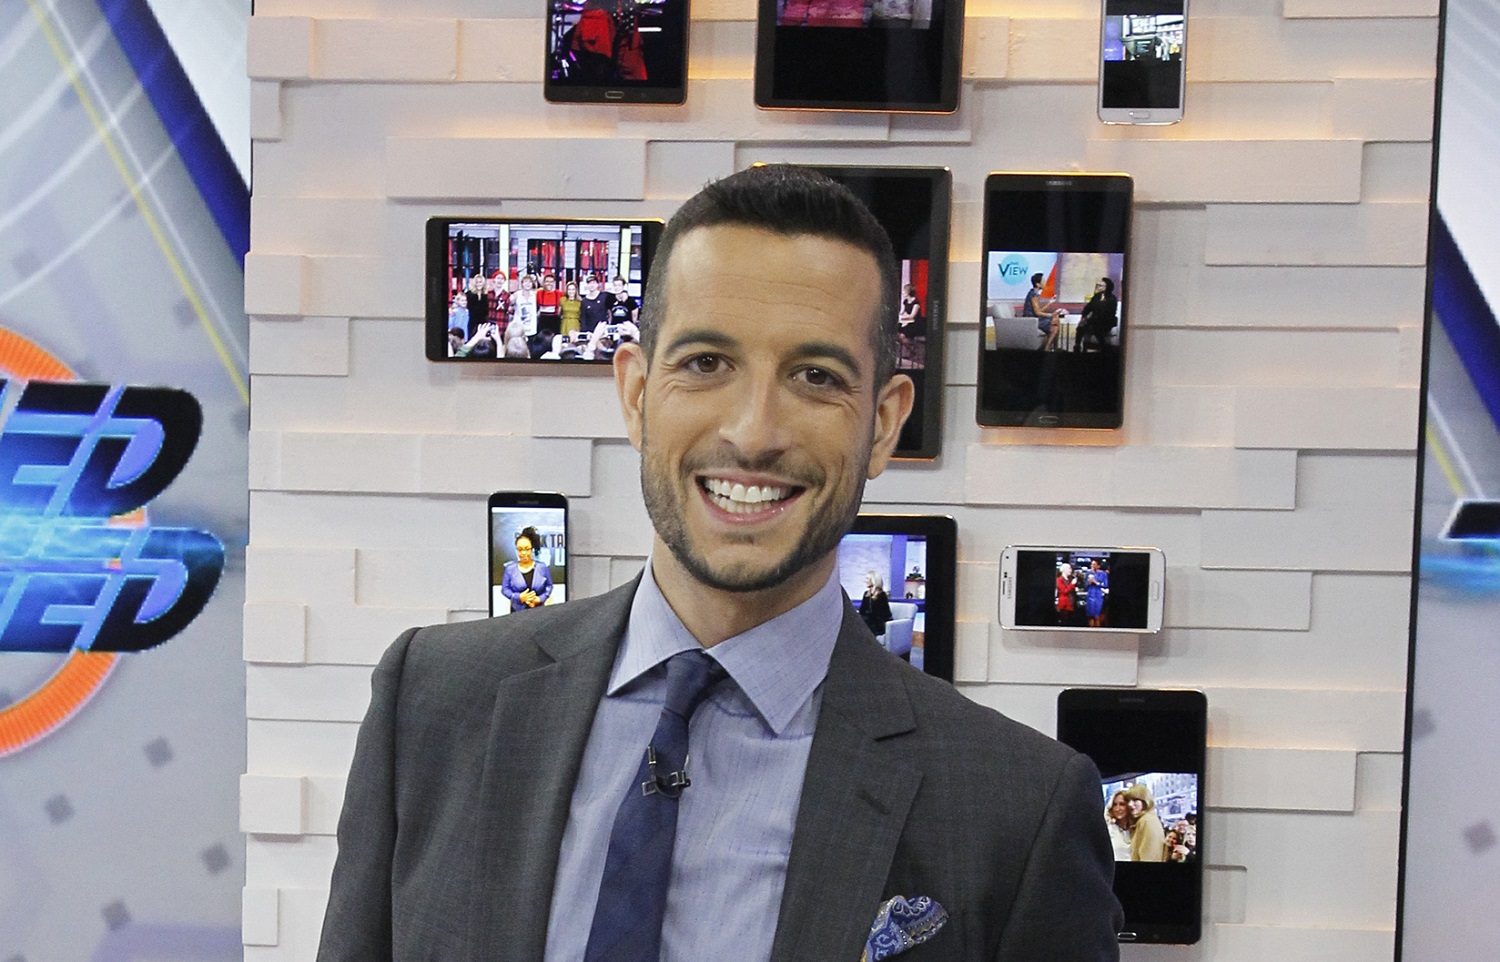 Tony Reali worked with Michael Wilbon and Tony Kornheiser on 'Pardon the Interruption' for more than a decade while also hosting 'Around the Horn' on ESPN. | Lou Rocco/Walt Disney Television via Getty Images.